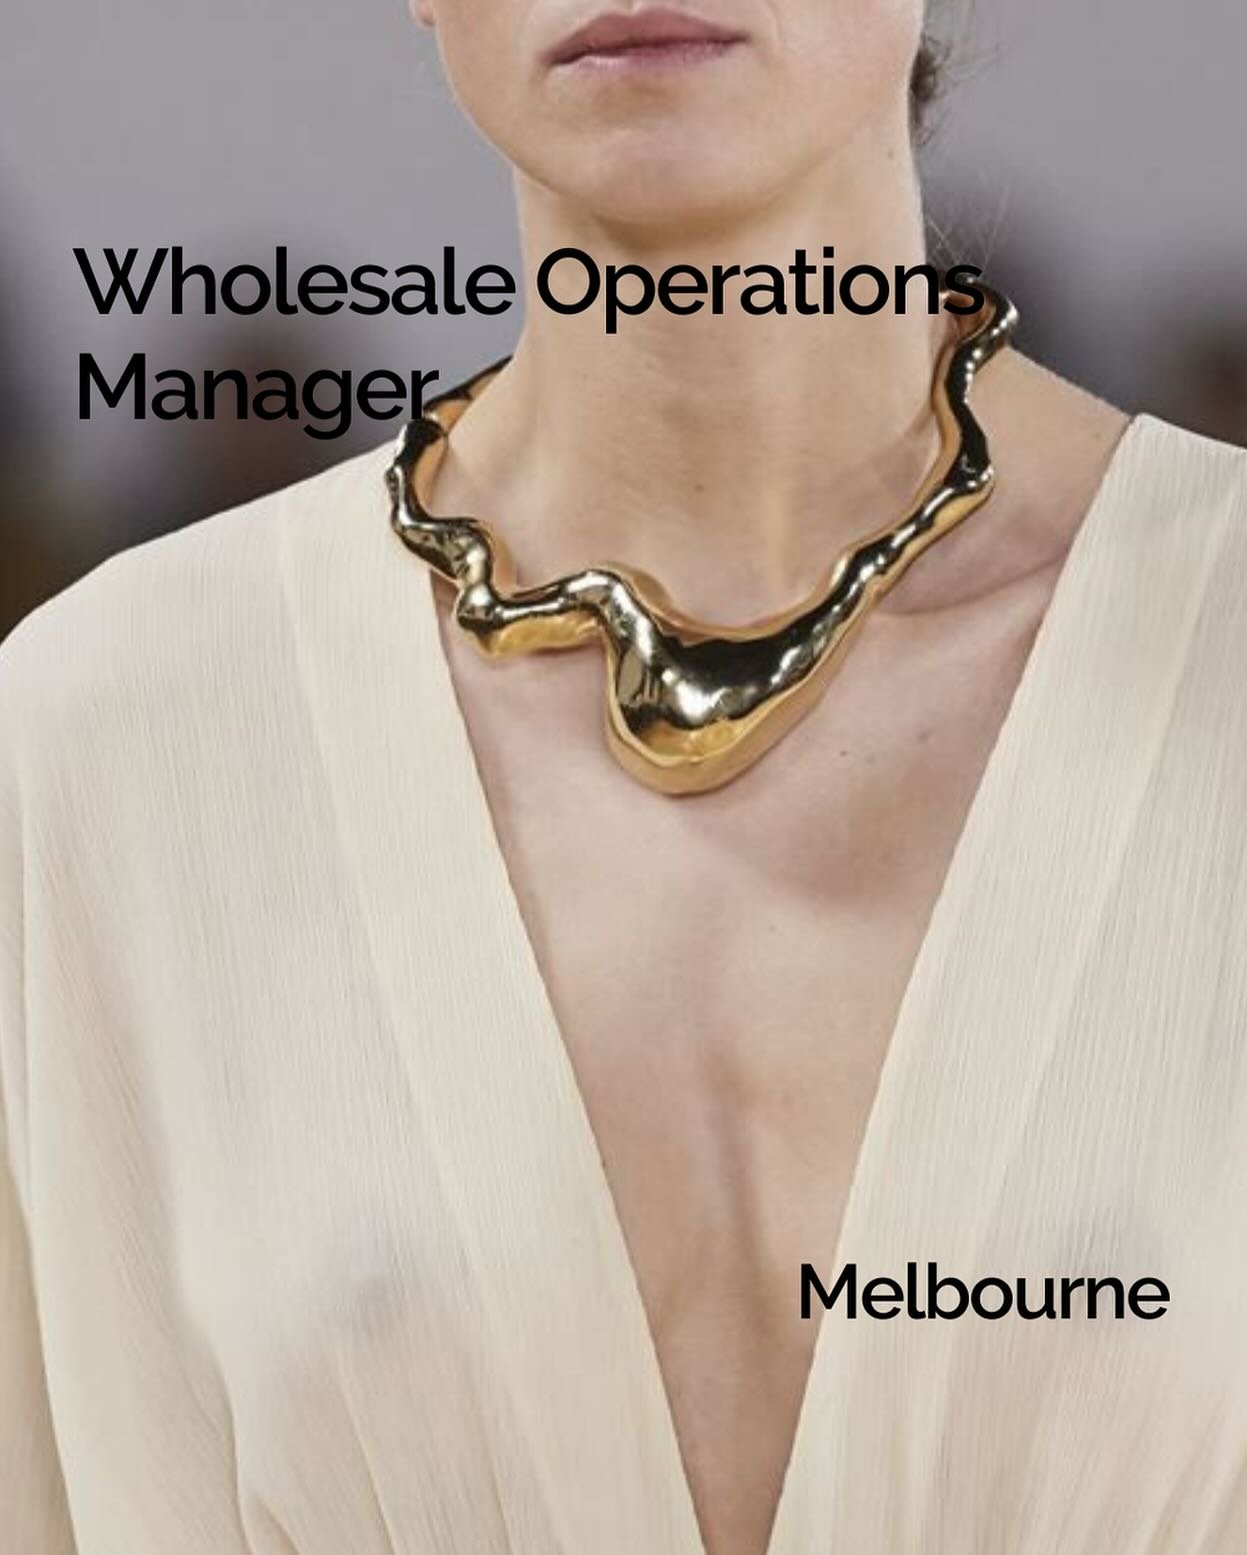 We are on the hunt for a Wholesale Operations Manager to work directly with the founder and team of a highly successful contemporary designer label based in Melbourne. This role will support the wholesale function and deliver the sales plan. Get in t